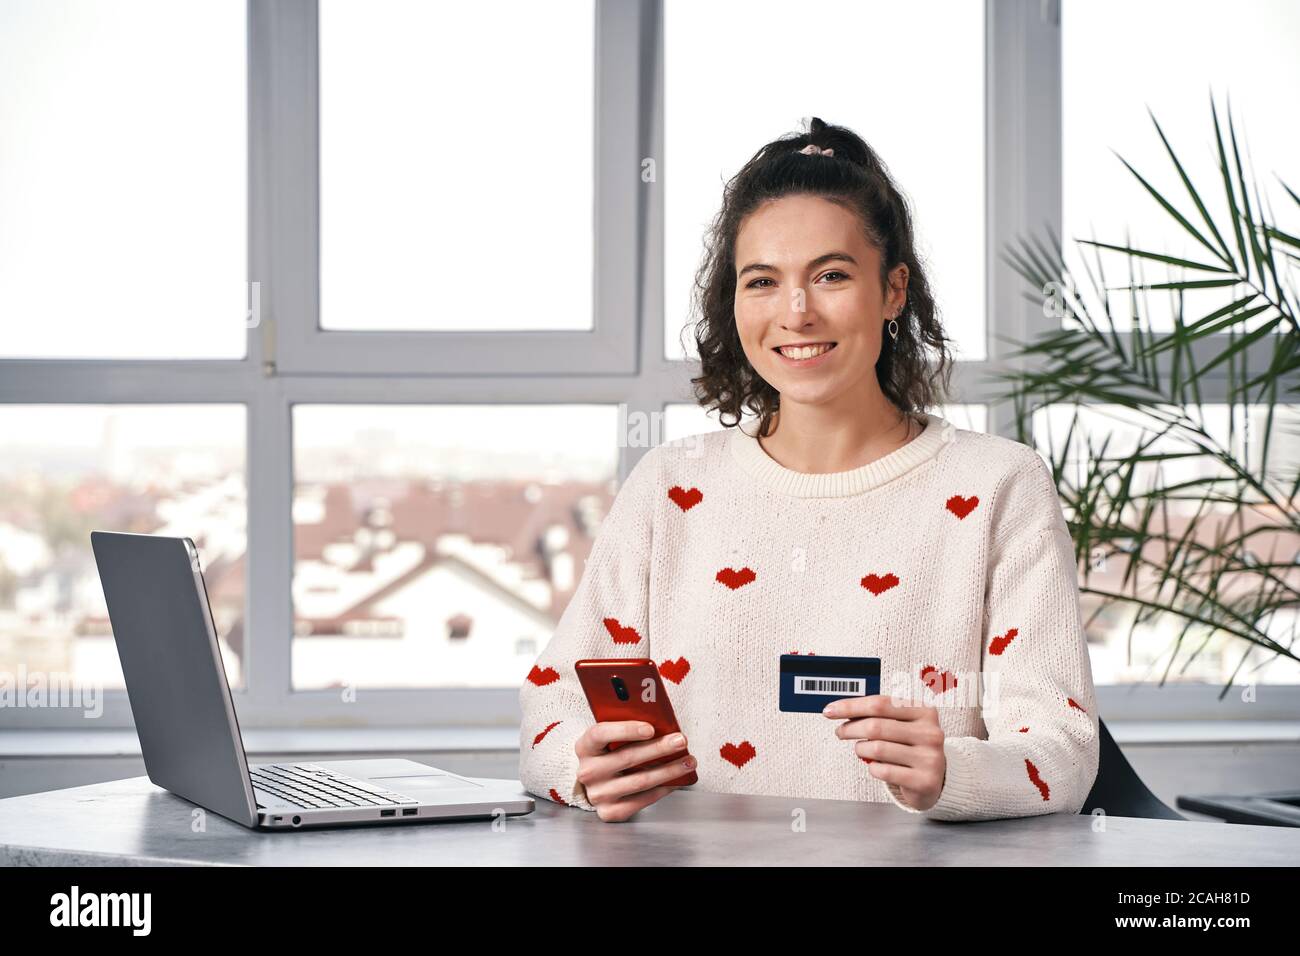 Happy smiling woman with red phone and credit card buying in the internet. Shopping online Stock Photo